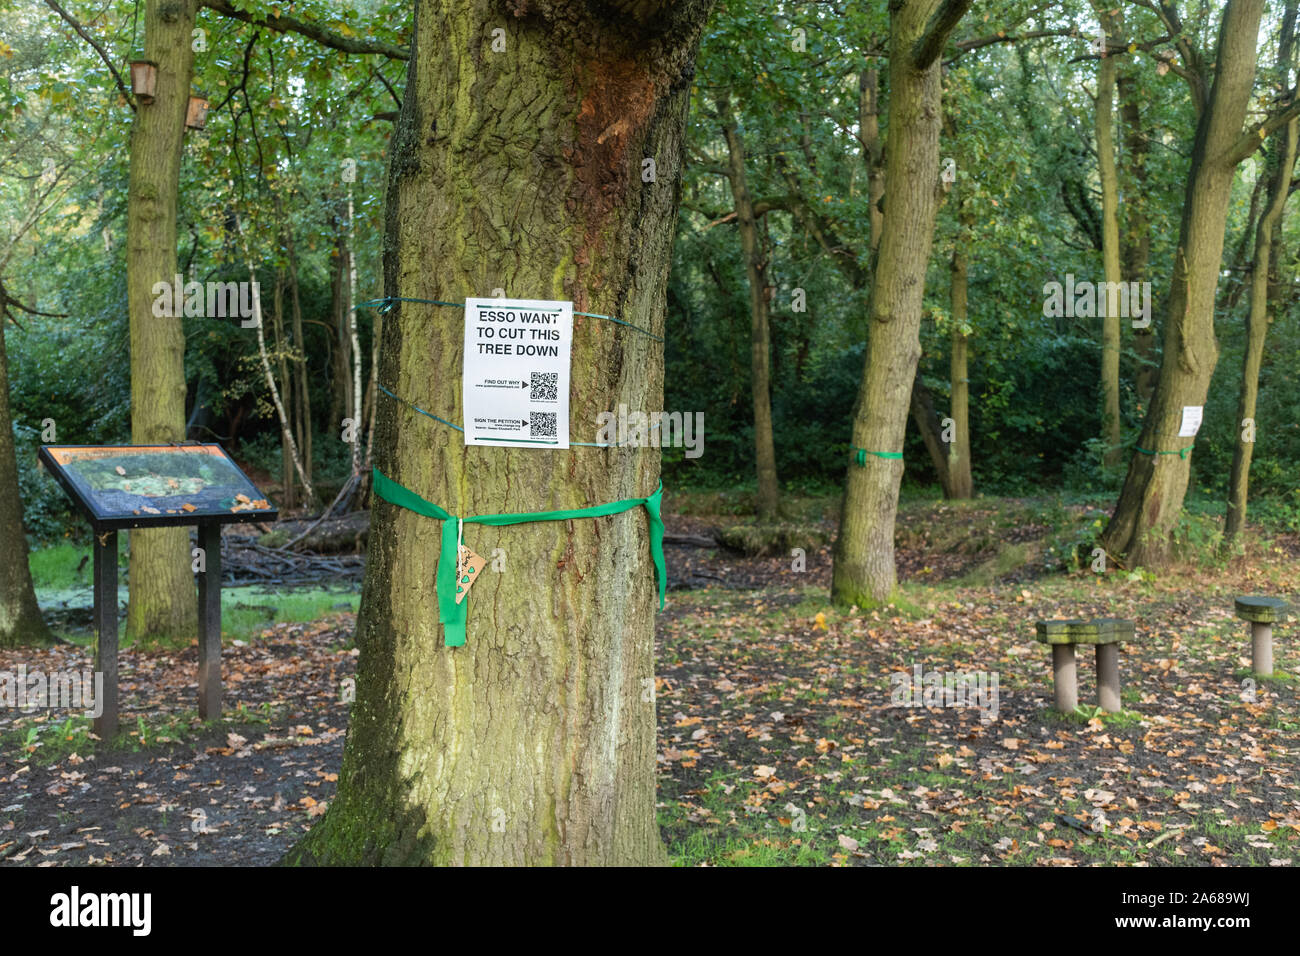 October 2019. Esso are planning to replace 90km of an existing aviation fuel pipeline from Southampton to London, and the proposed route passes through Queen Elizabeth Park in Farnborough, Hampshire, UK. The project includes cutting down many trees in the park, including mature trees. An action group has been set up by Donna Wallace, previous Green Party candidate for Rushmoor Borough Council, named Save Queen Elizabeth Park from the Esso Aviation Fuel Pipeline. Notices have been put up on the threatened trees and green ribbons tied round them, and a petition has been started Stock Photo